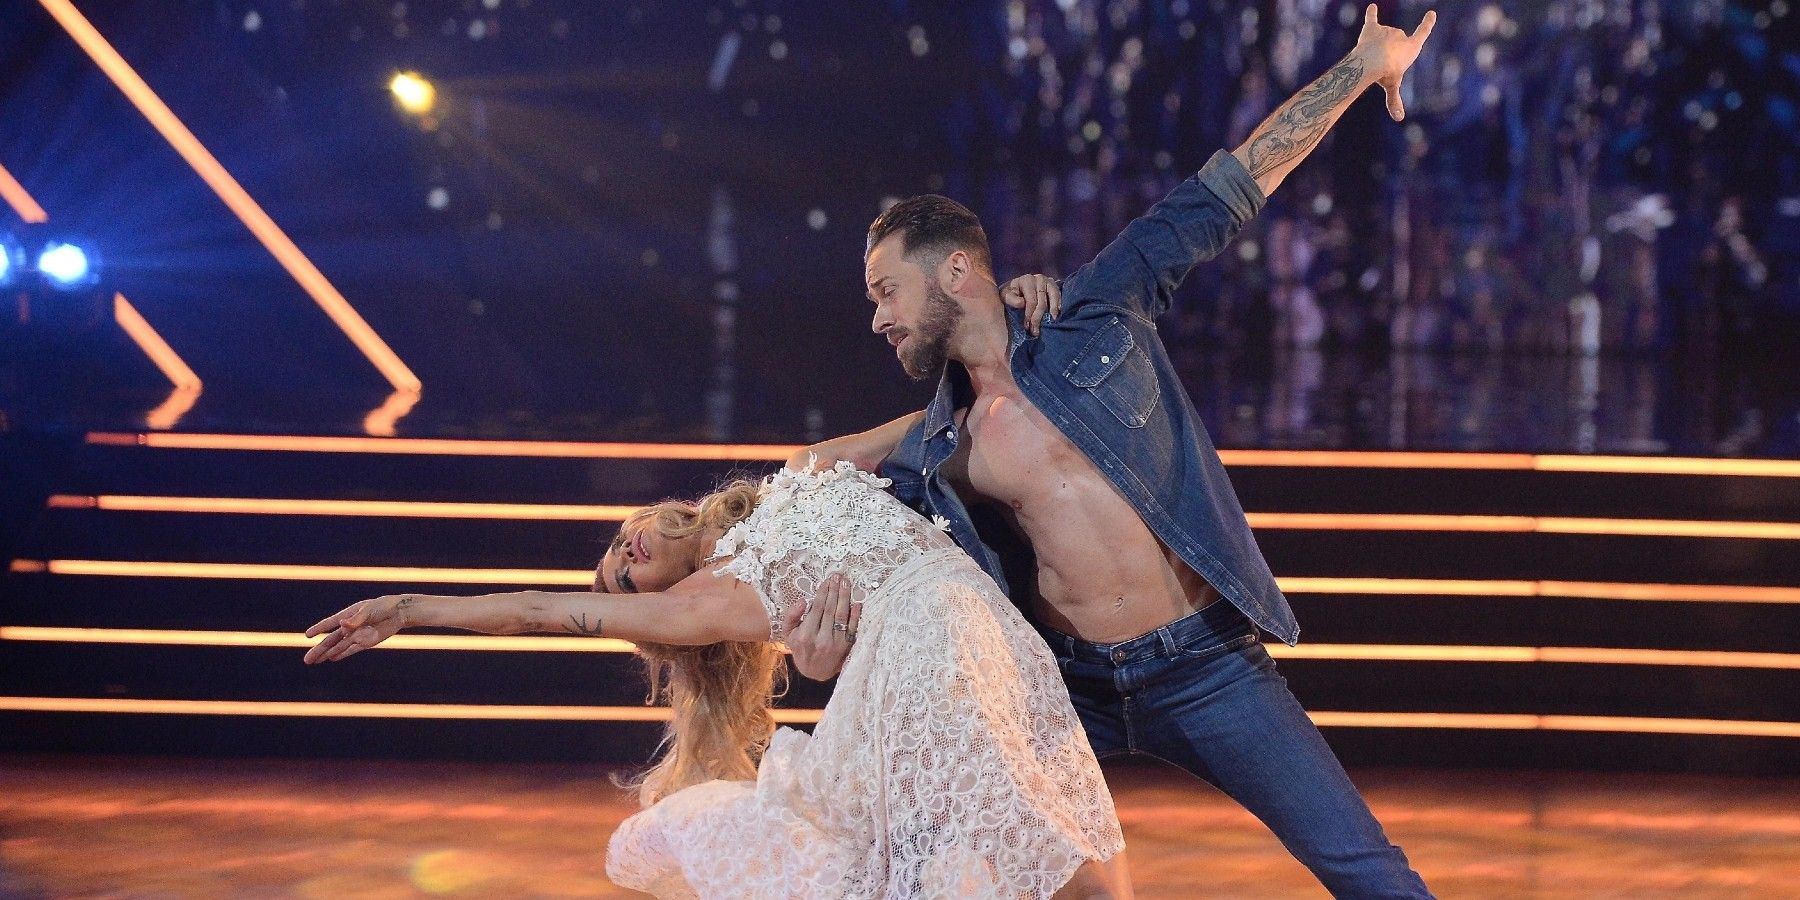 Kaitlyn-Bristowe-The-Bachelor-2 dancing with white dress with artem